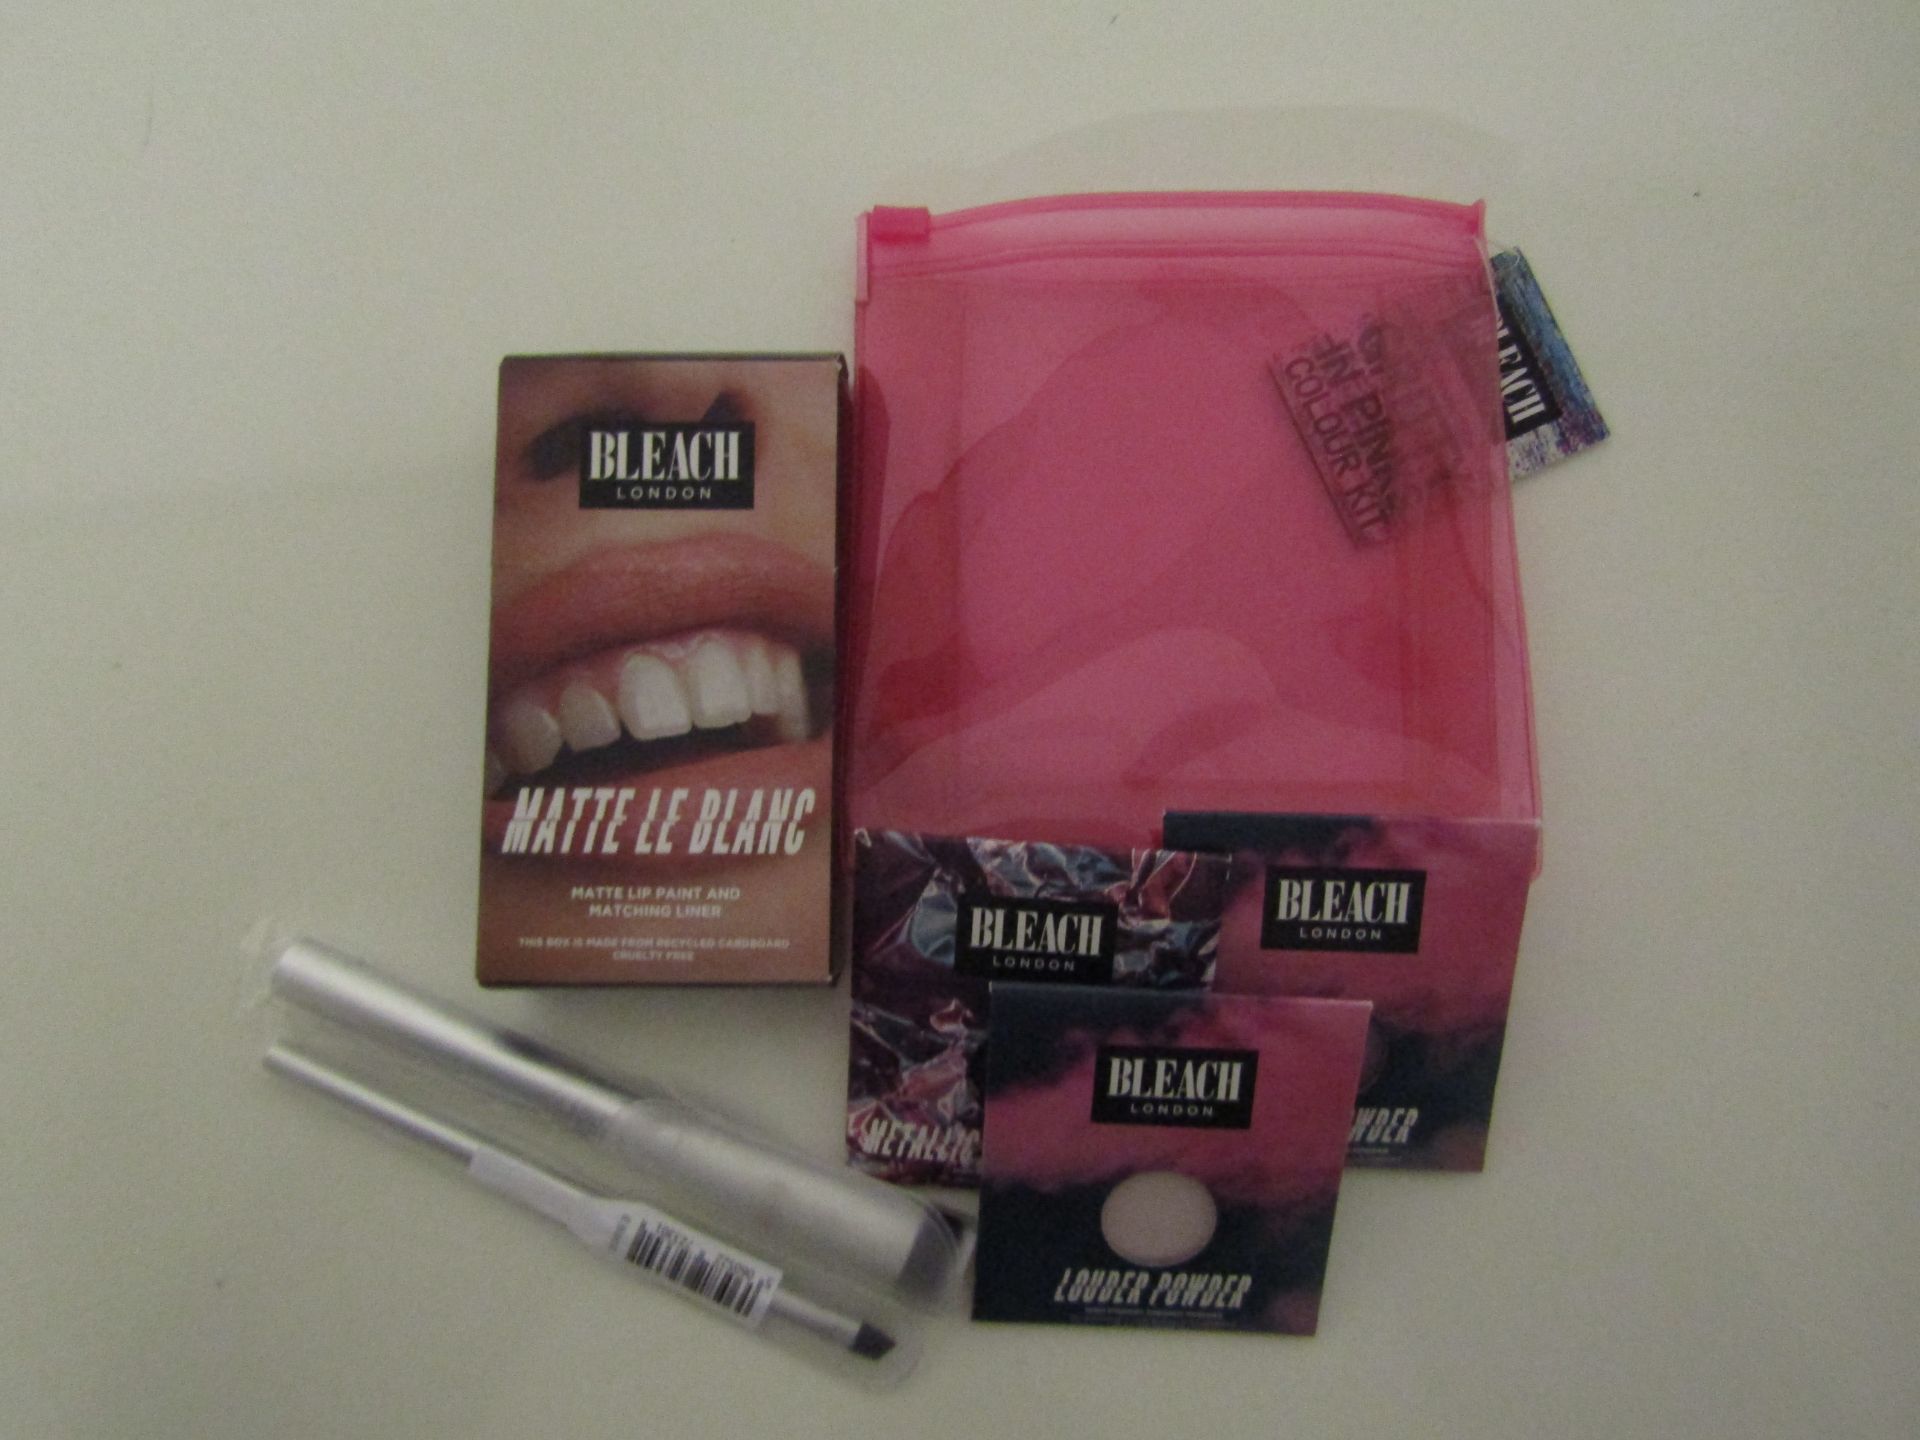 6-Piece Make-Up Set From Bleach London : 1x Mini Pink Make-Up Case 2x Various Make-Up Brushes 3x